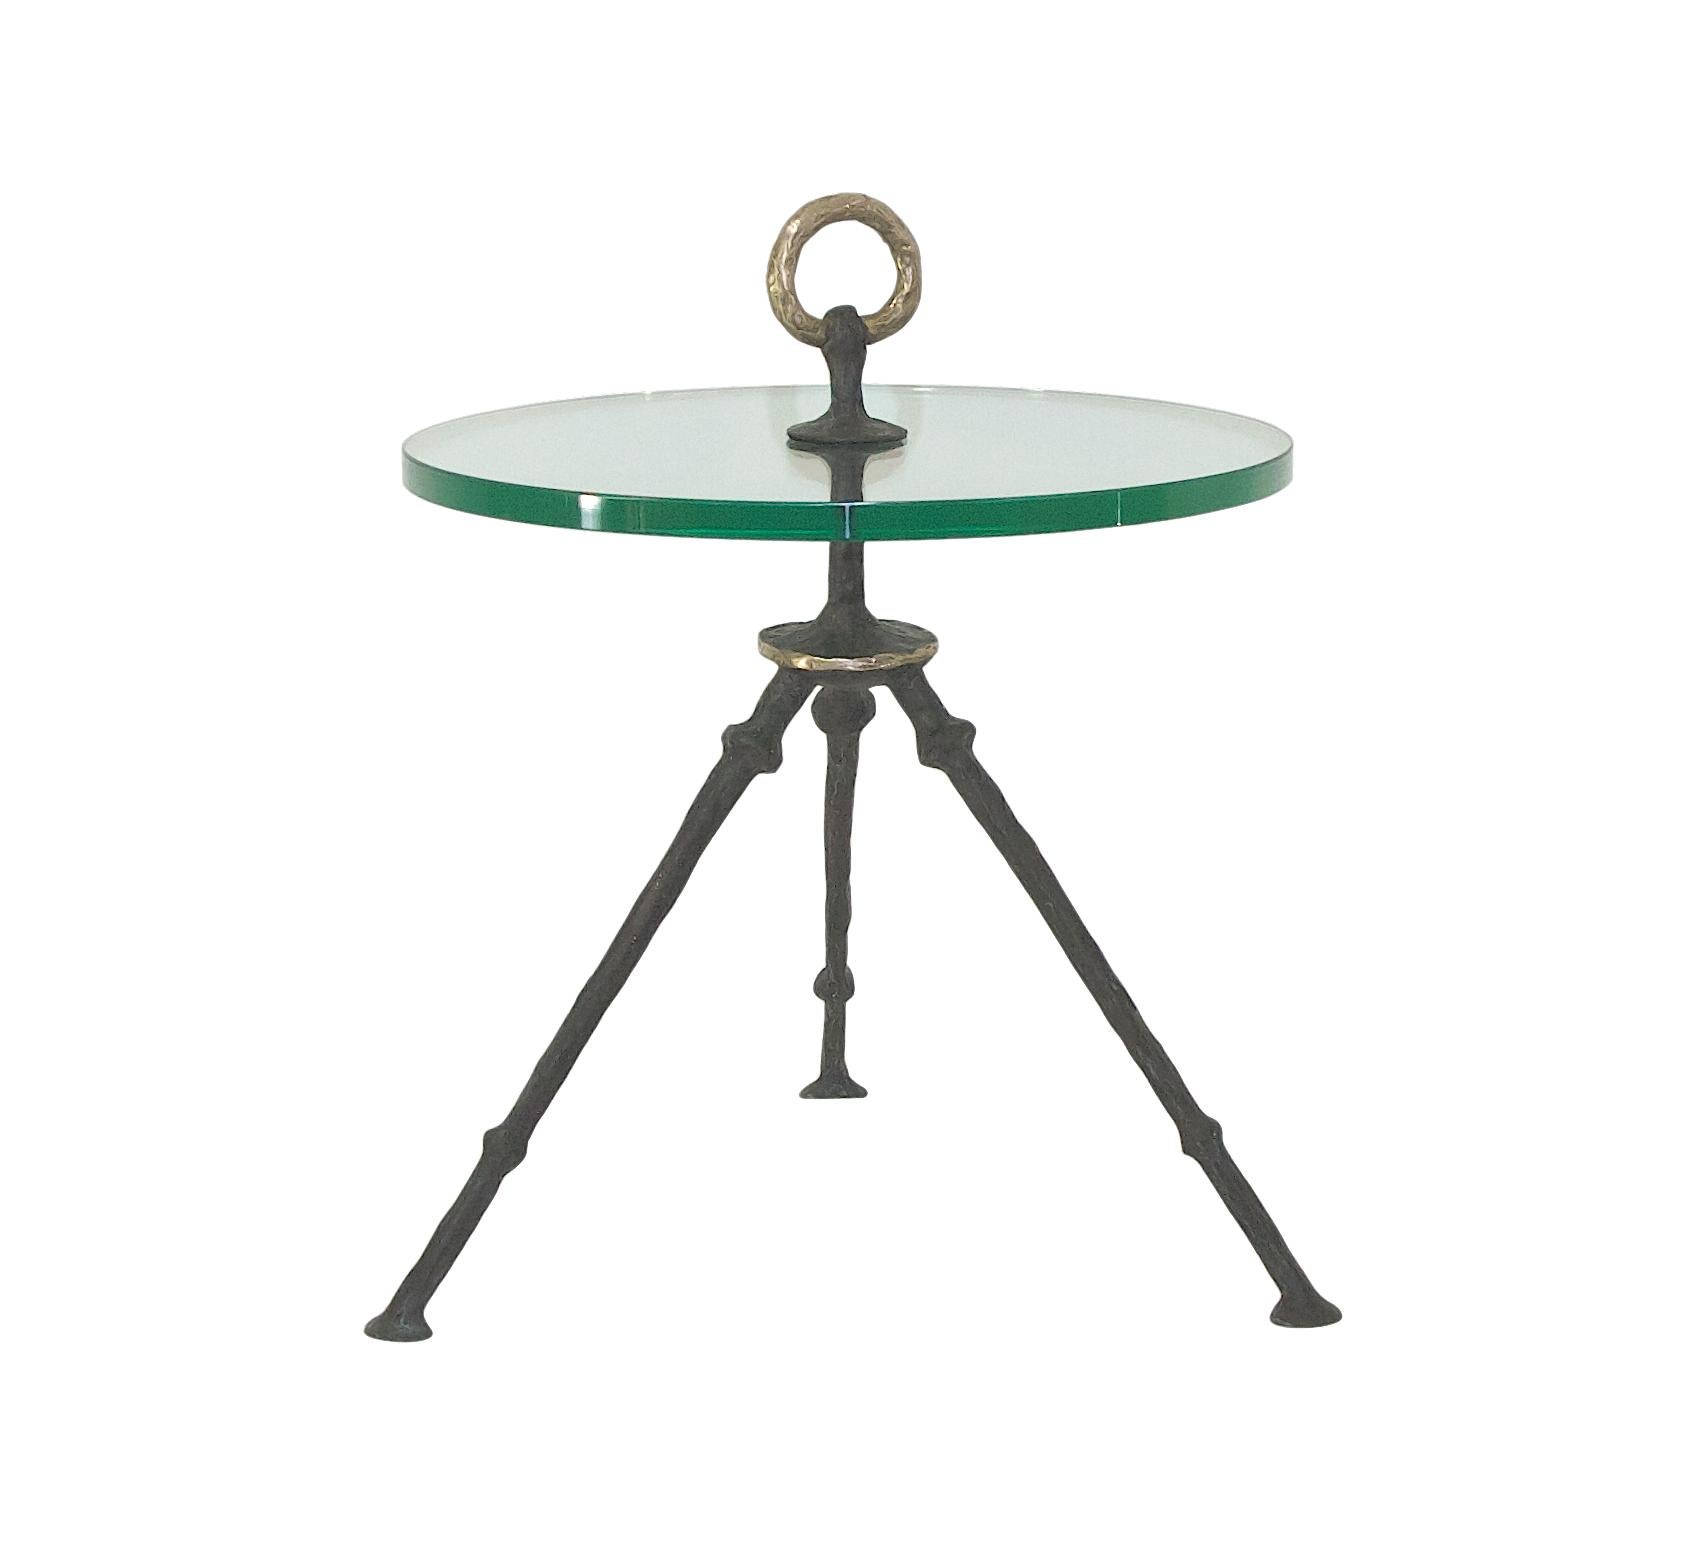 A hand-sculpted and forged tripod cocktail table with a circular glass or stone top, it is fastened with a solid bronze handle on top. Custom sizes, finishes and tops available.